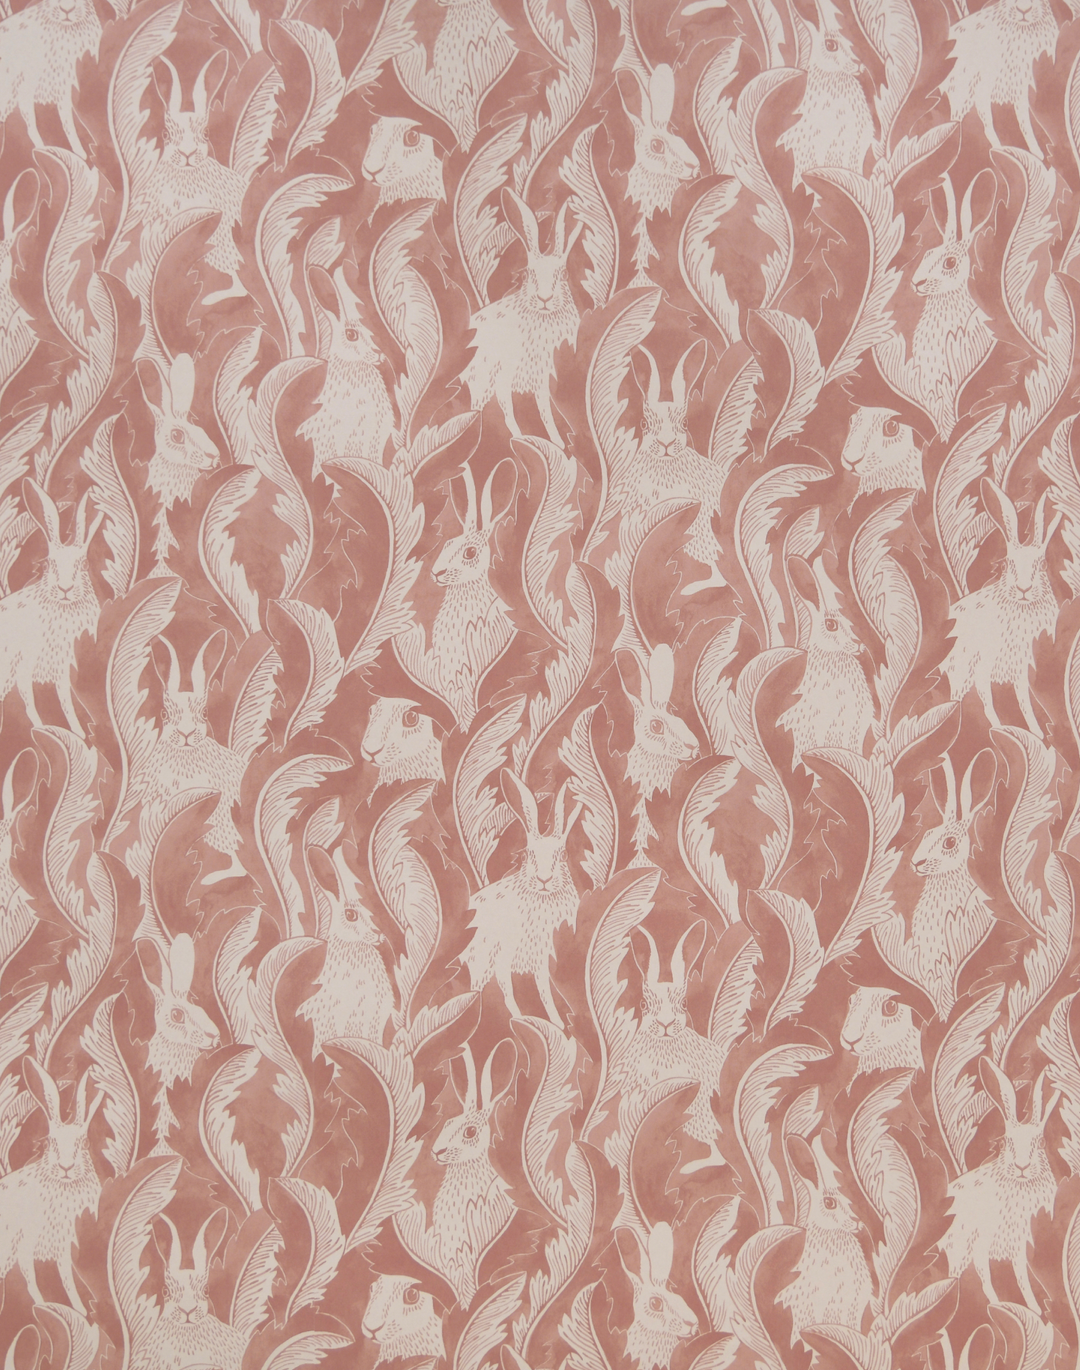 Hares in Hiding, Dusty Pink